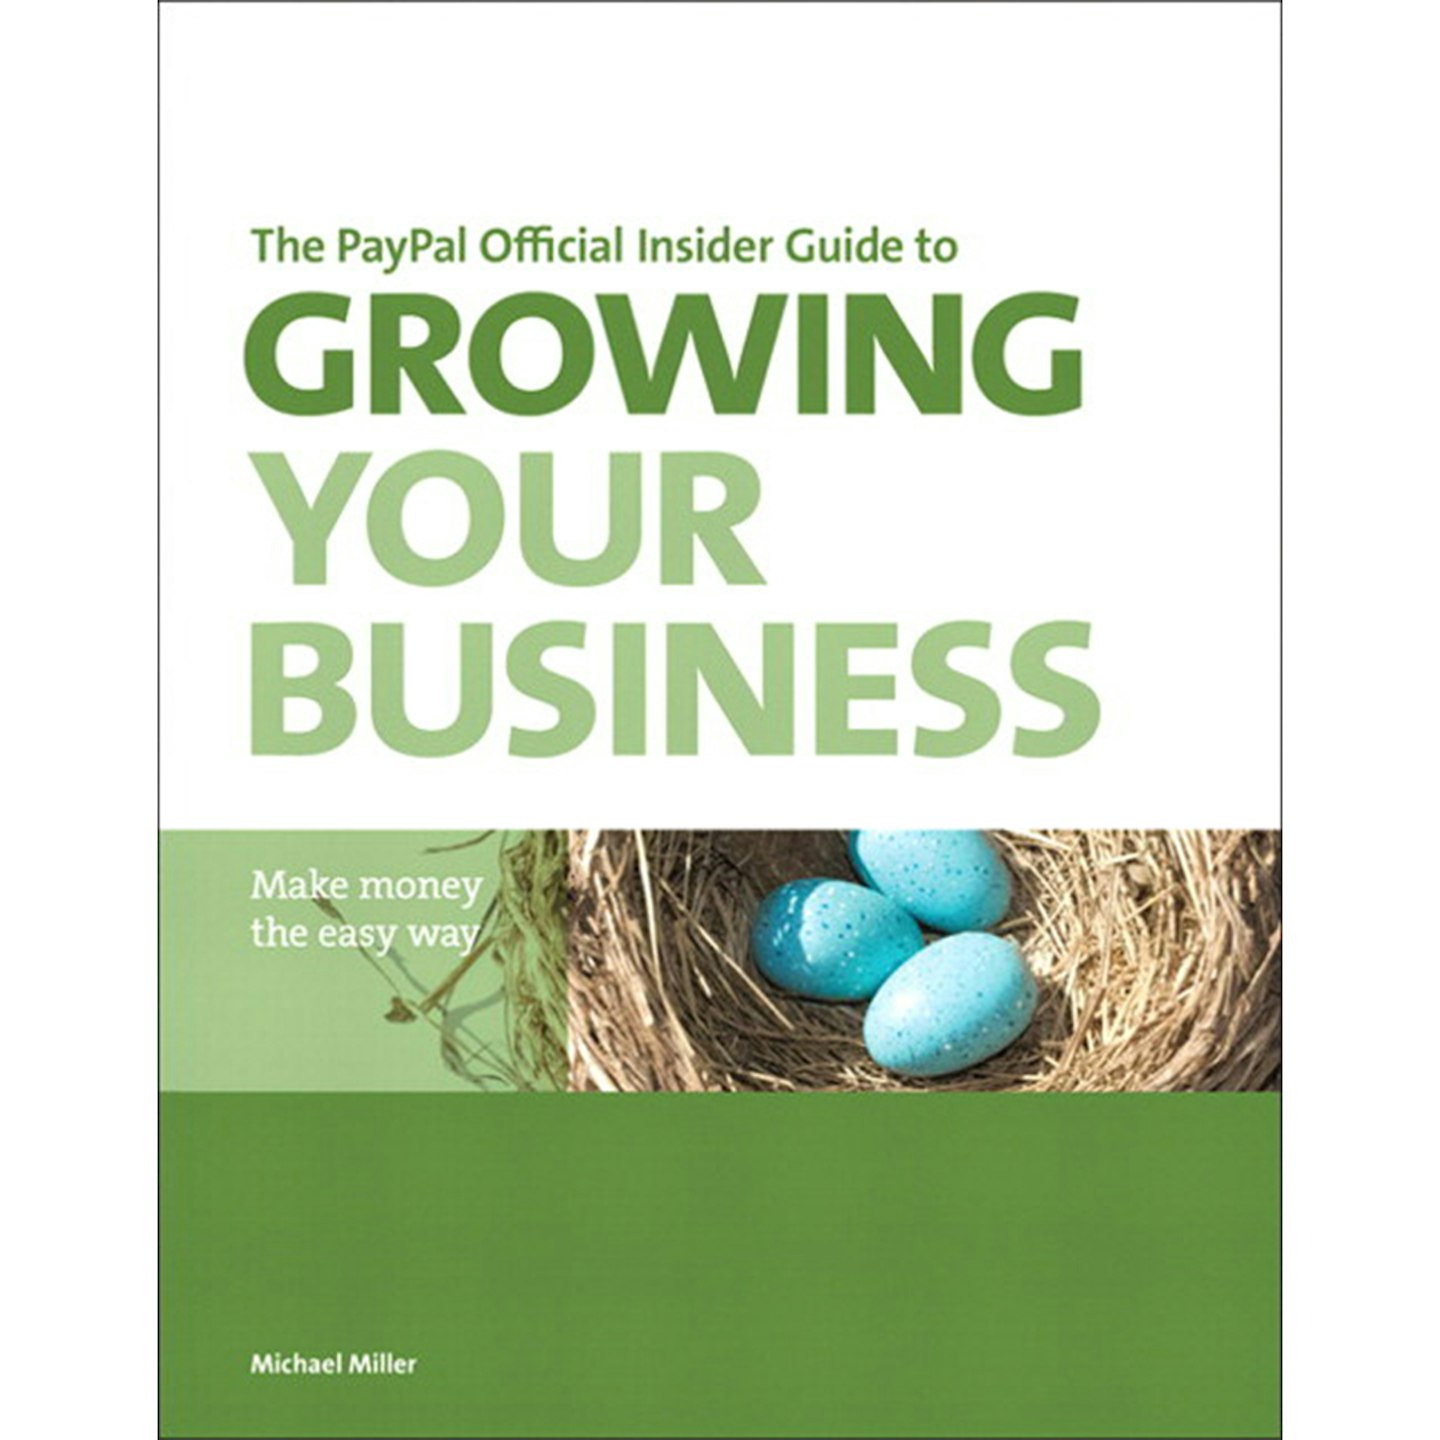 PayPal Official Insider Guide to Growing Your Business